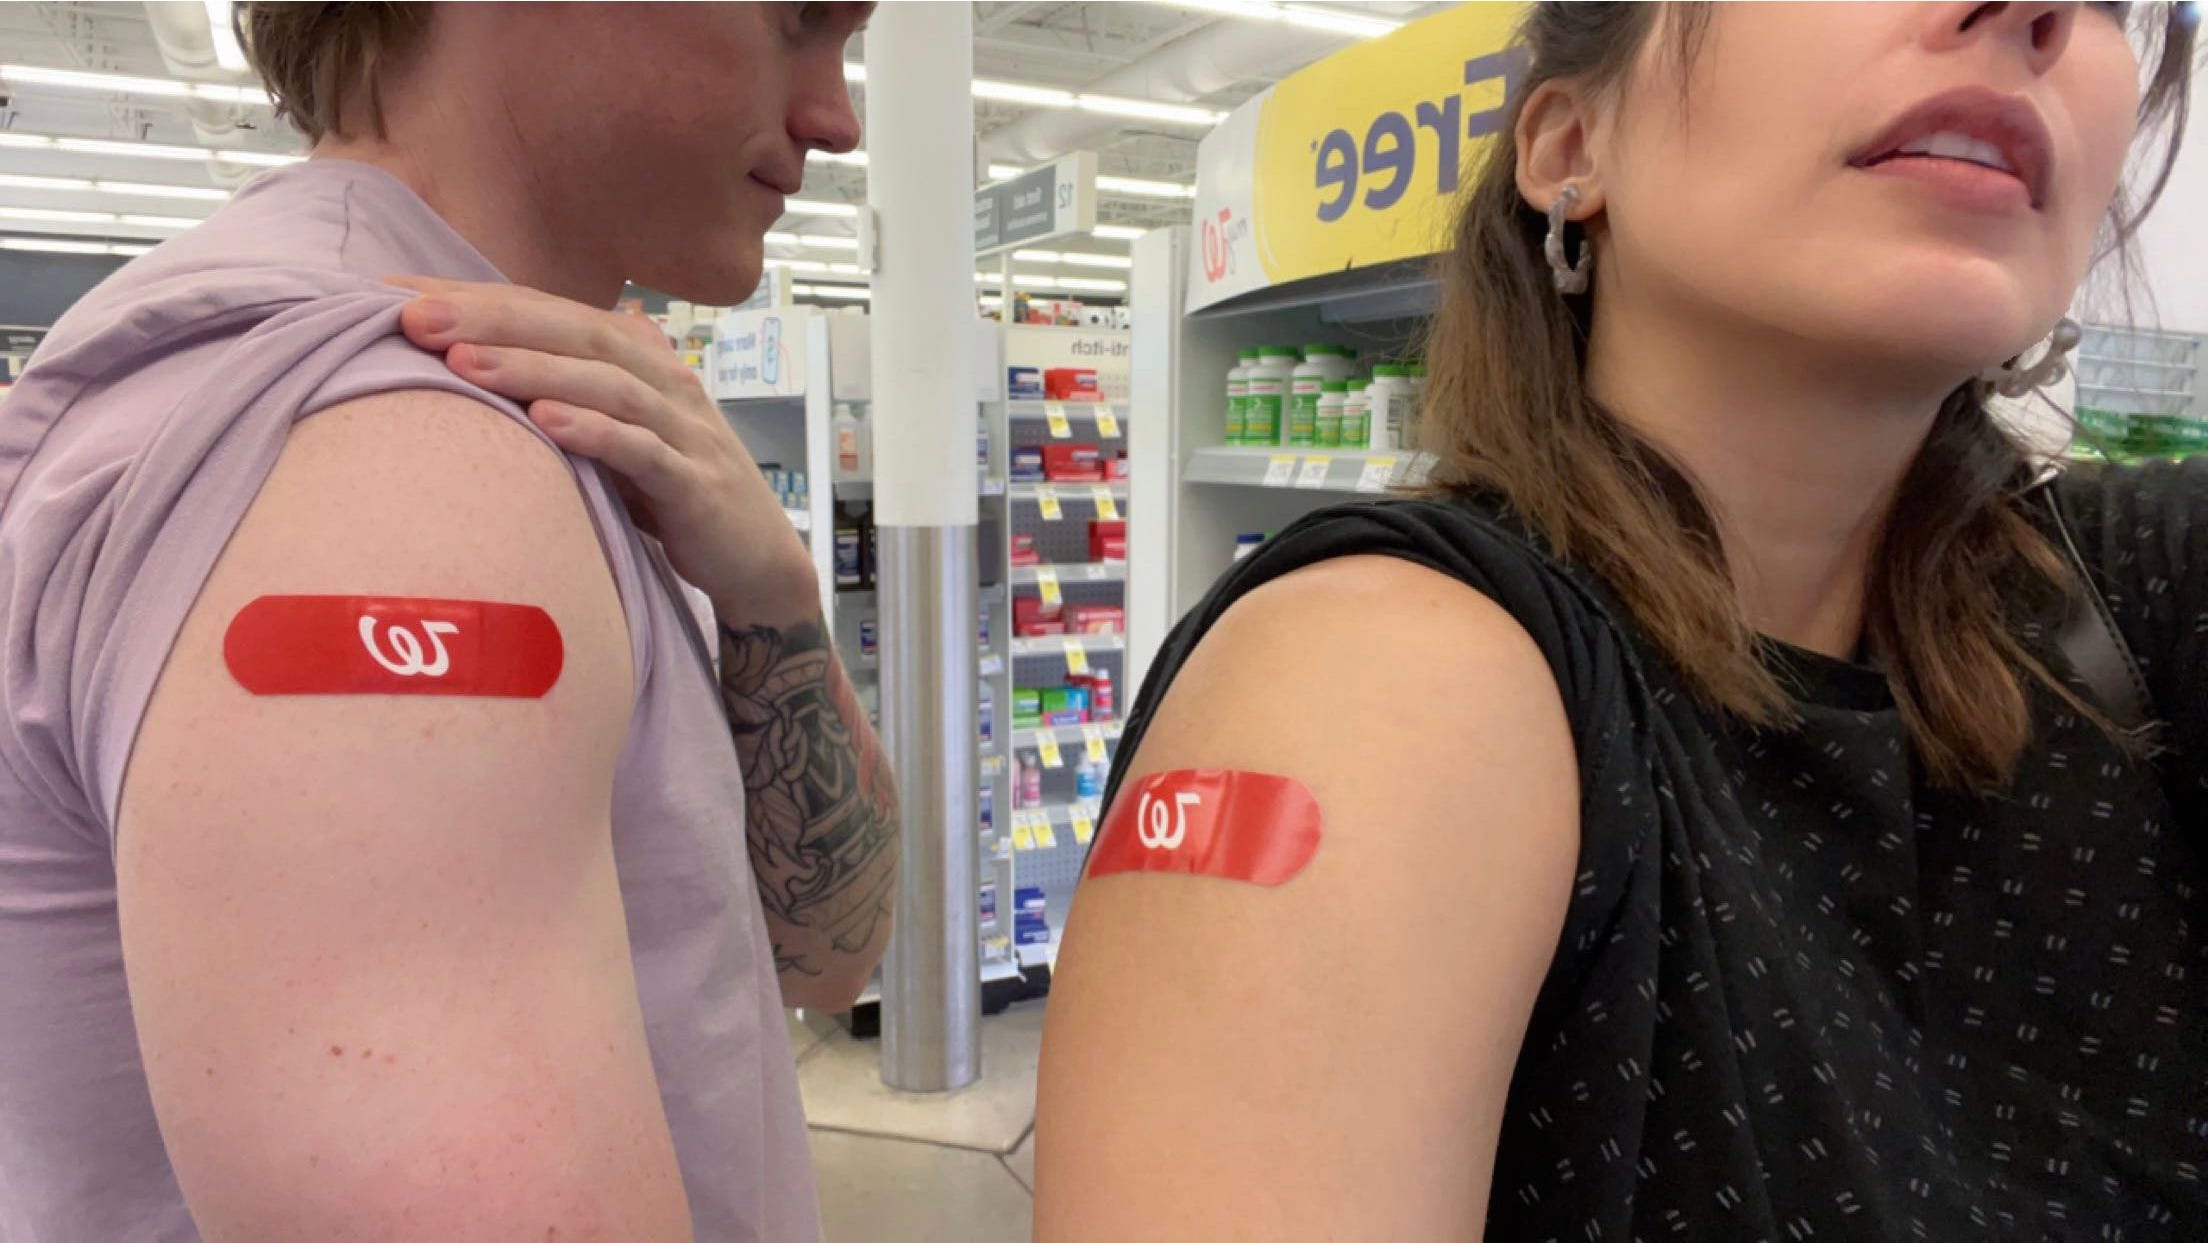 andrea valdez and brandon wells showing their arms with band aids from injections sites